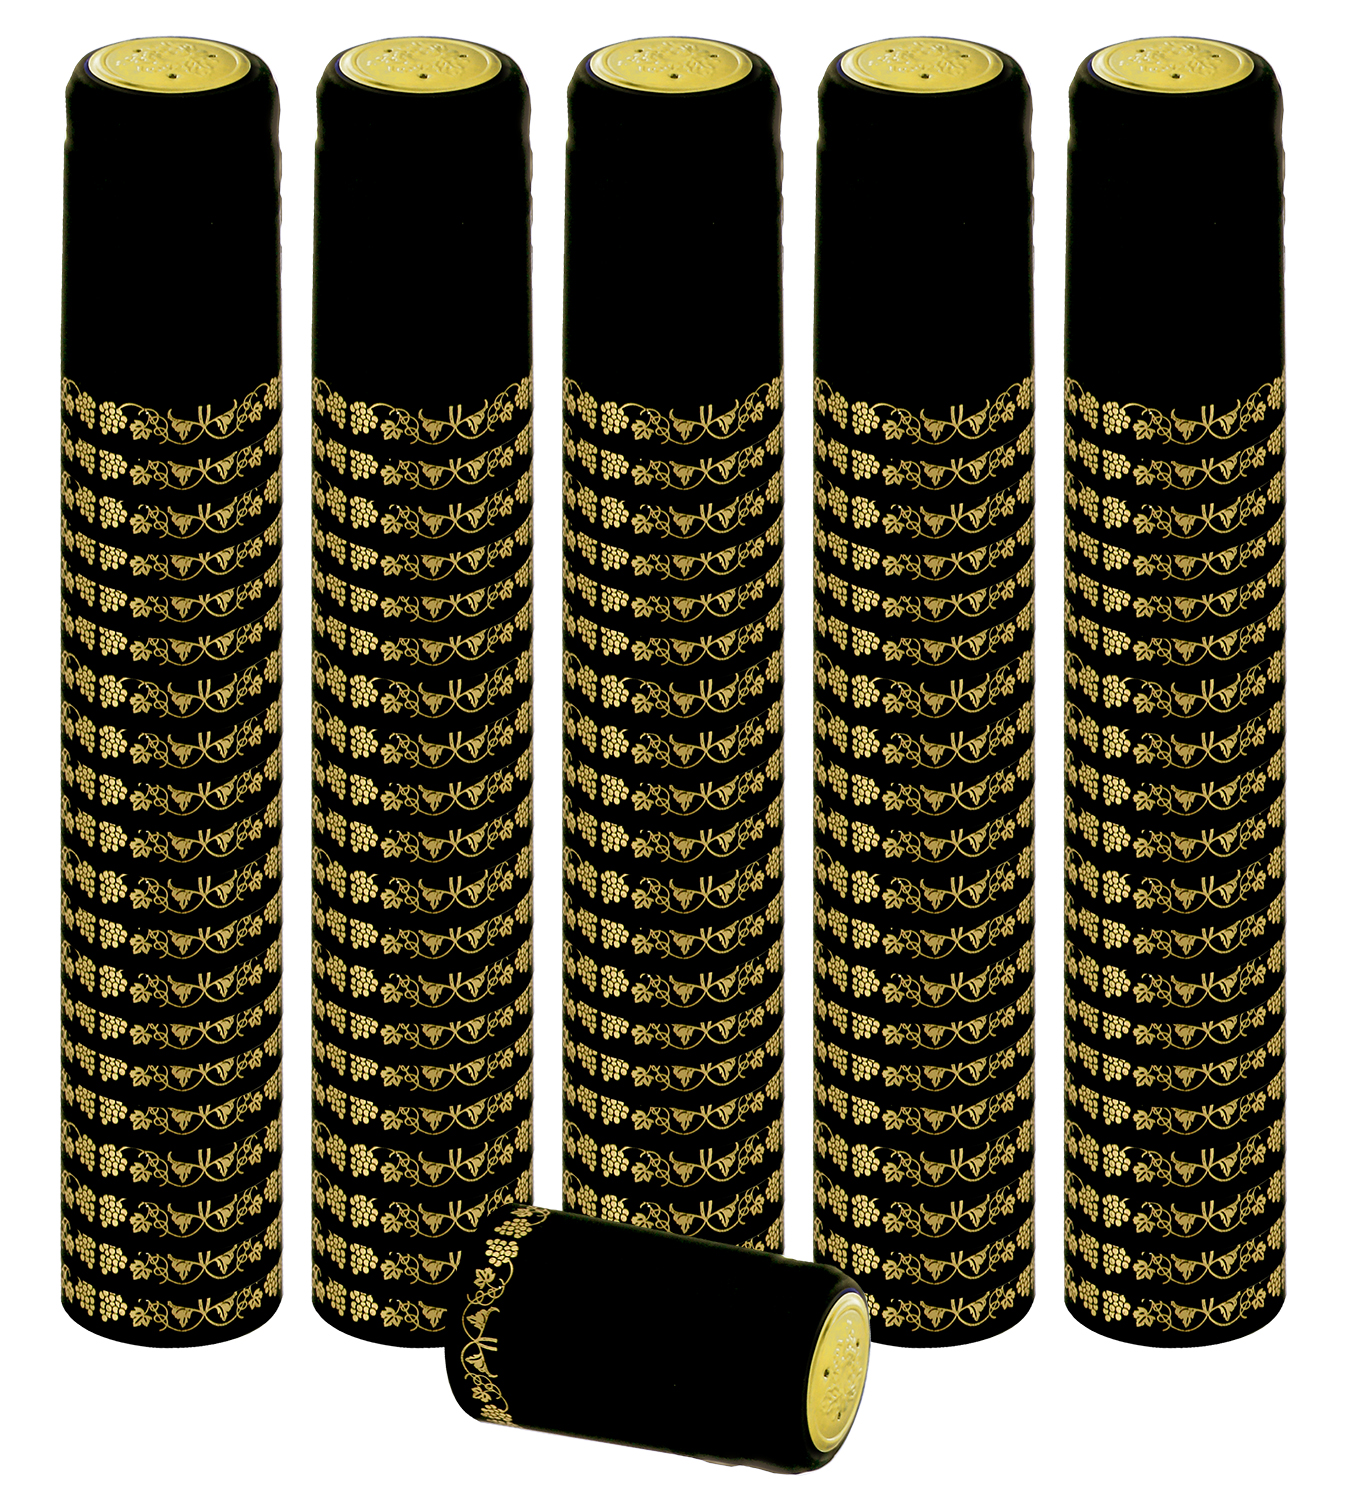 HBO Home Brew Ohio PVC Heat Shrink Capsules For Wine Bottles - 100 Count (Black With Gold)